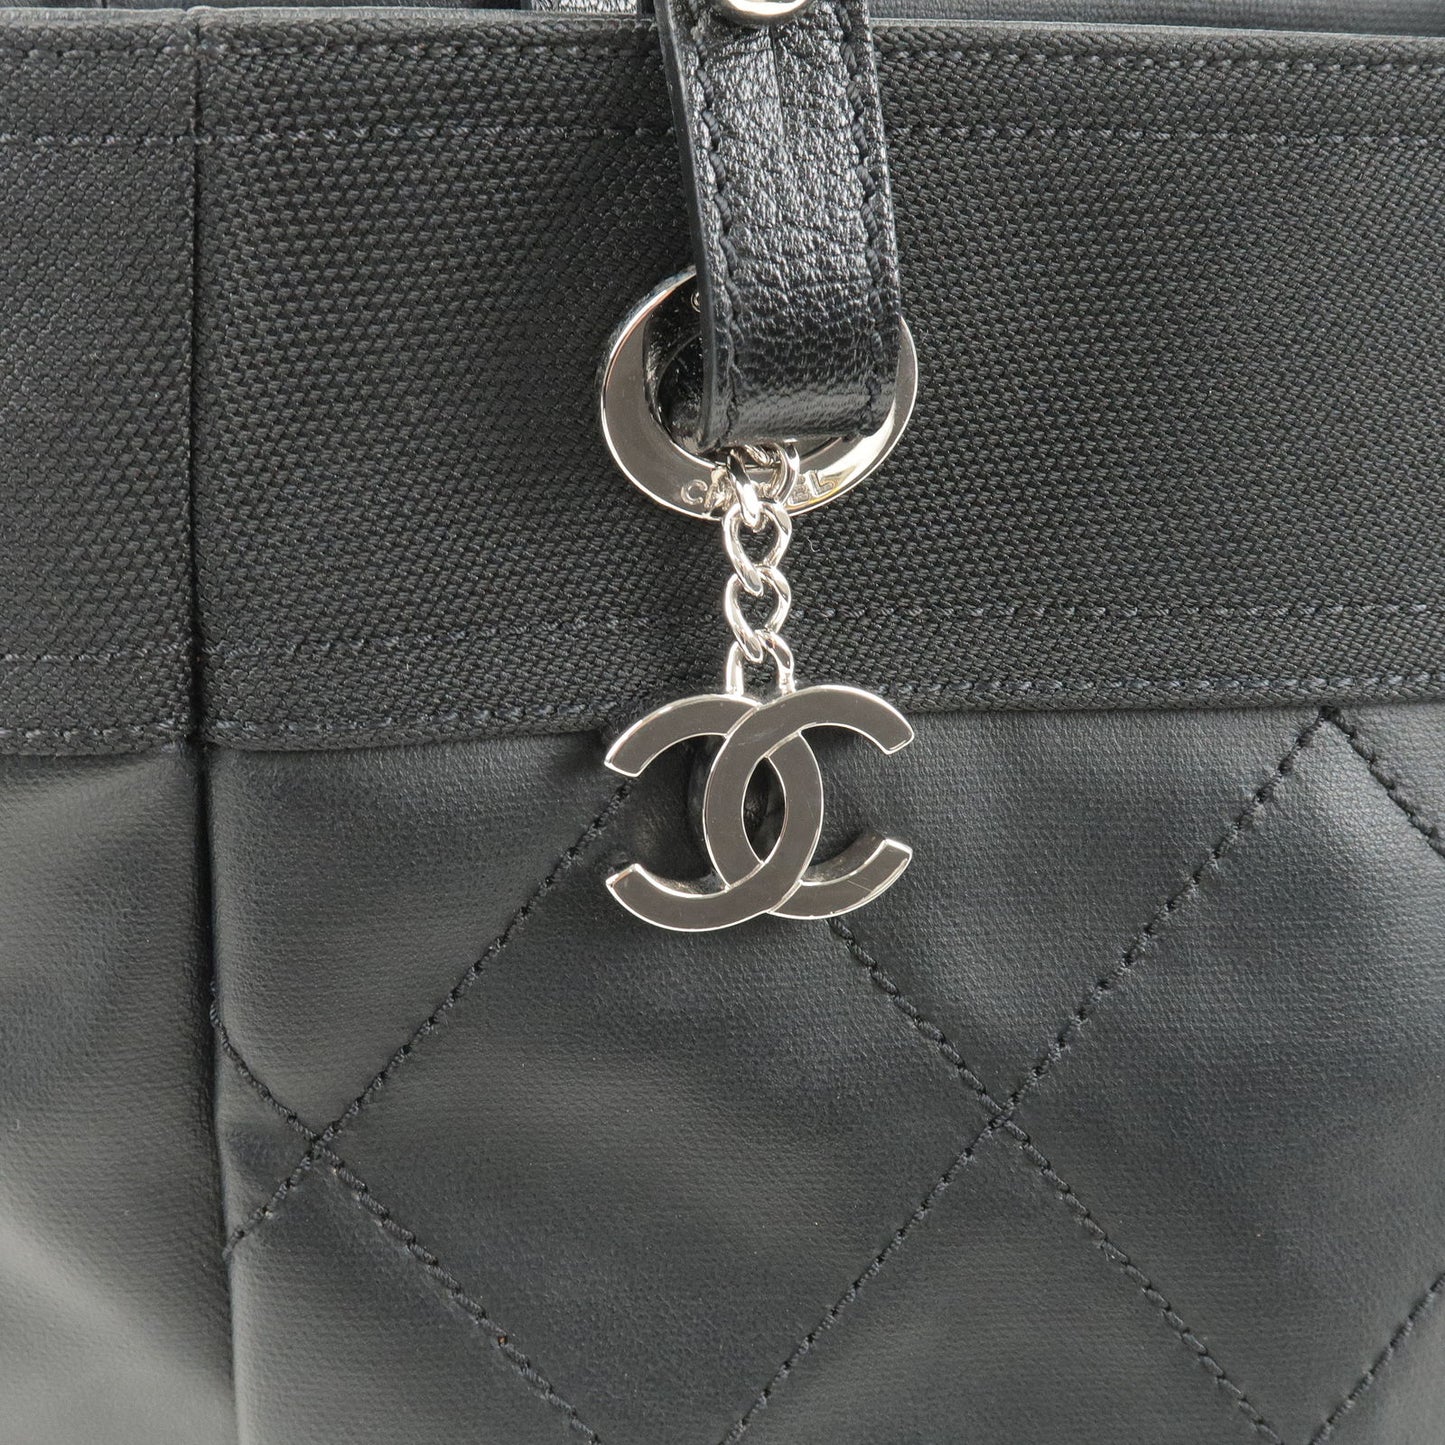 CHANEL Coated Canvas Leather Paris Biarritz PM Tote Bag A34208